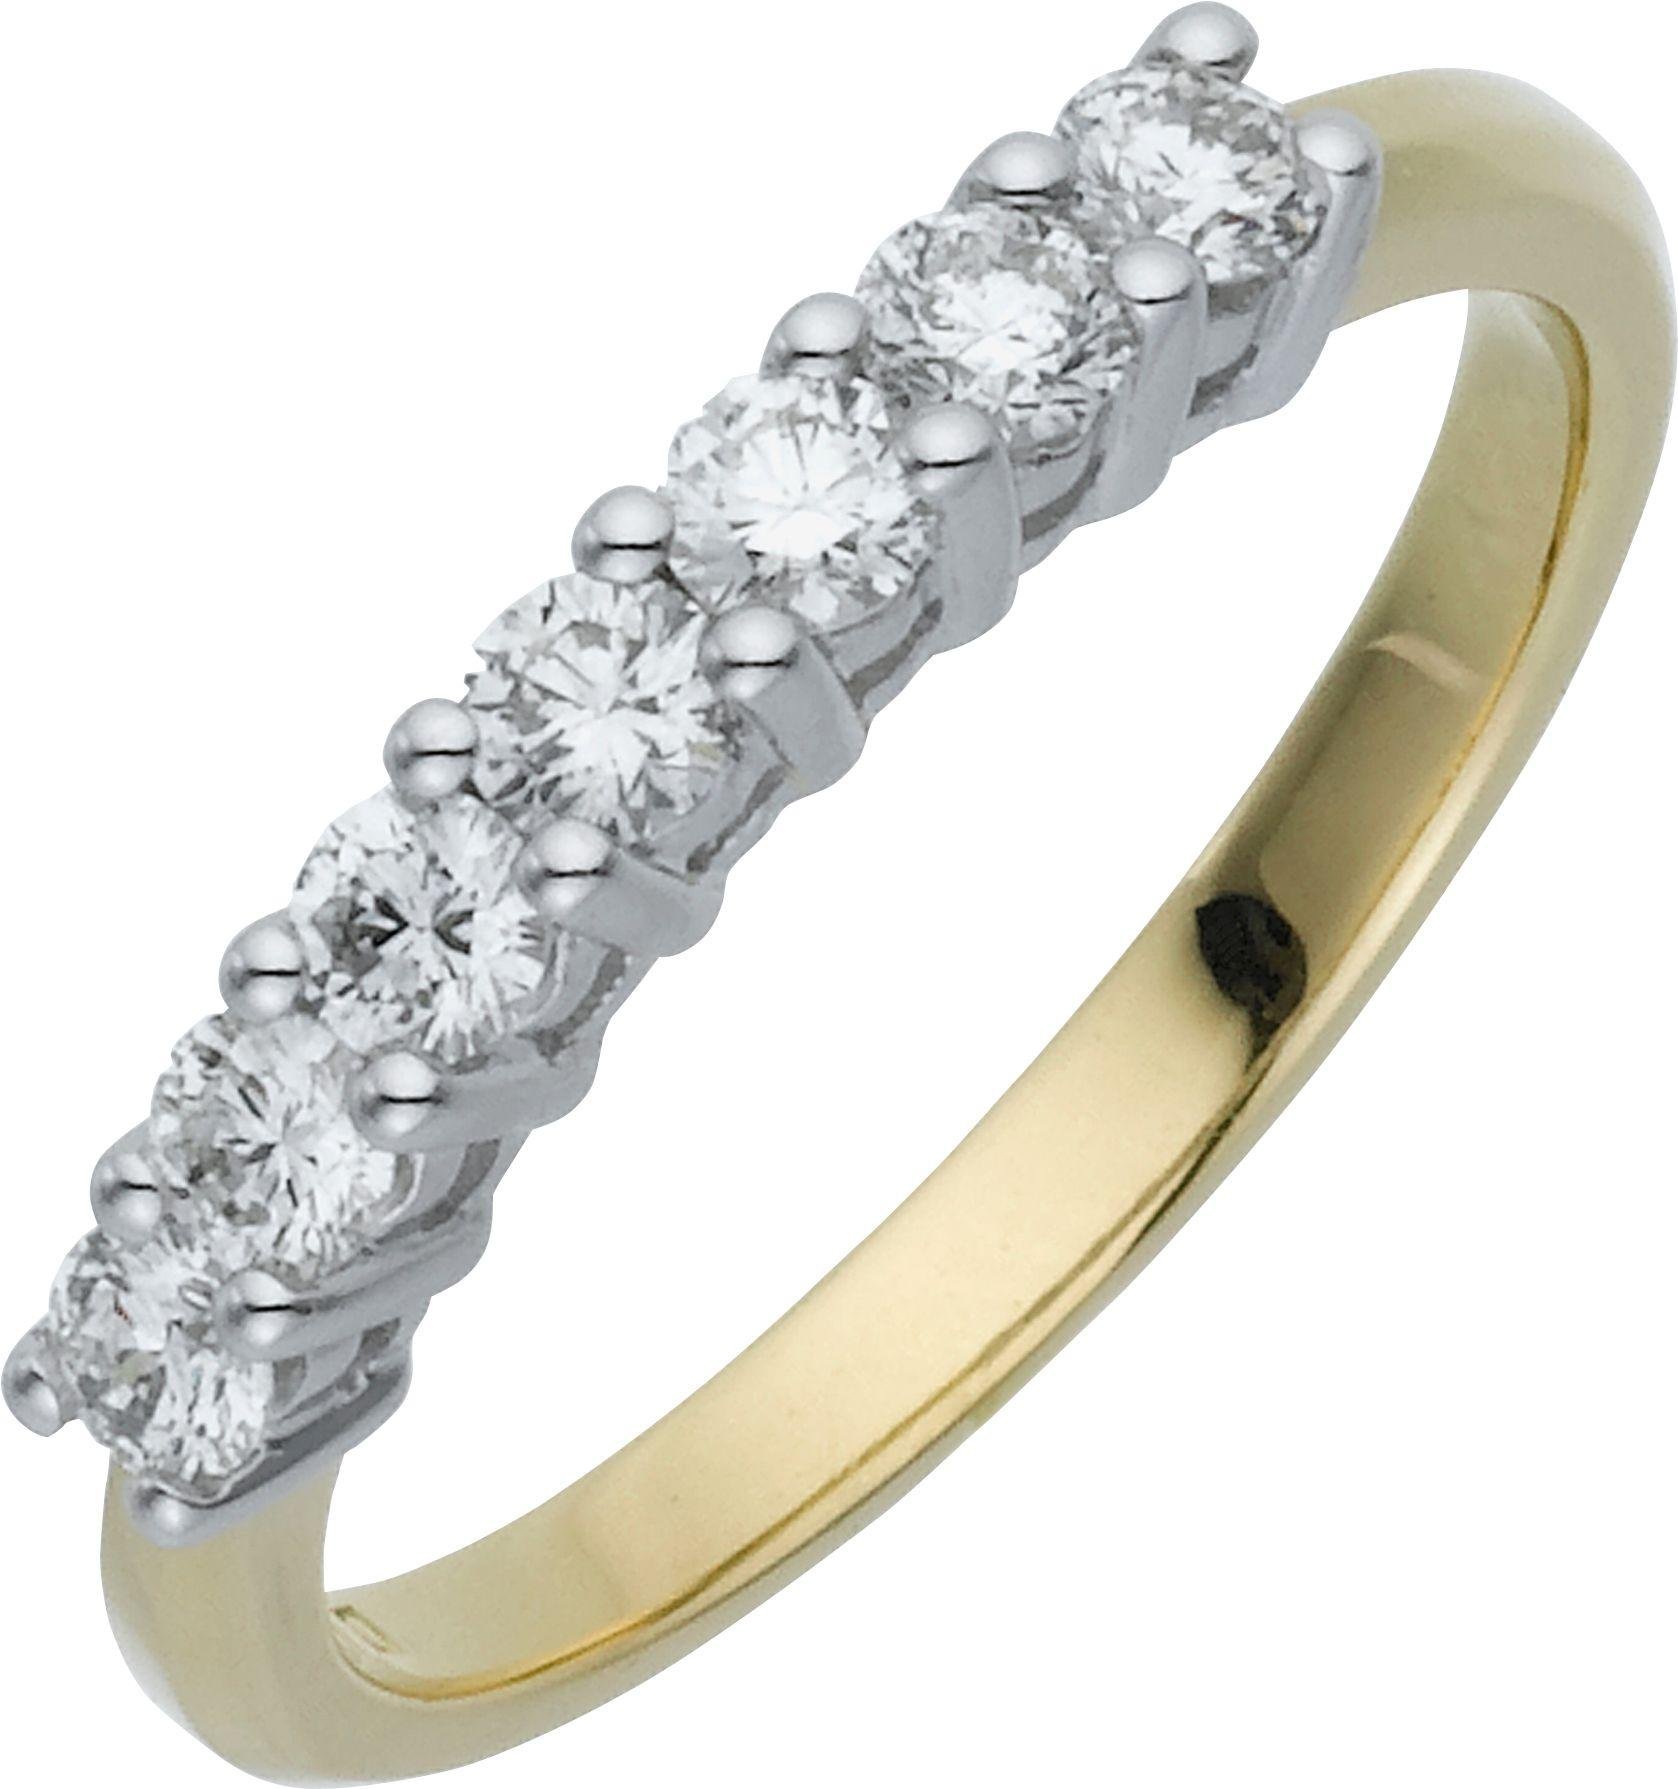 Everlasting Love 9ct Gold 7 Stone Eternity Ring - Size N